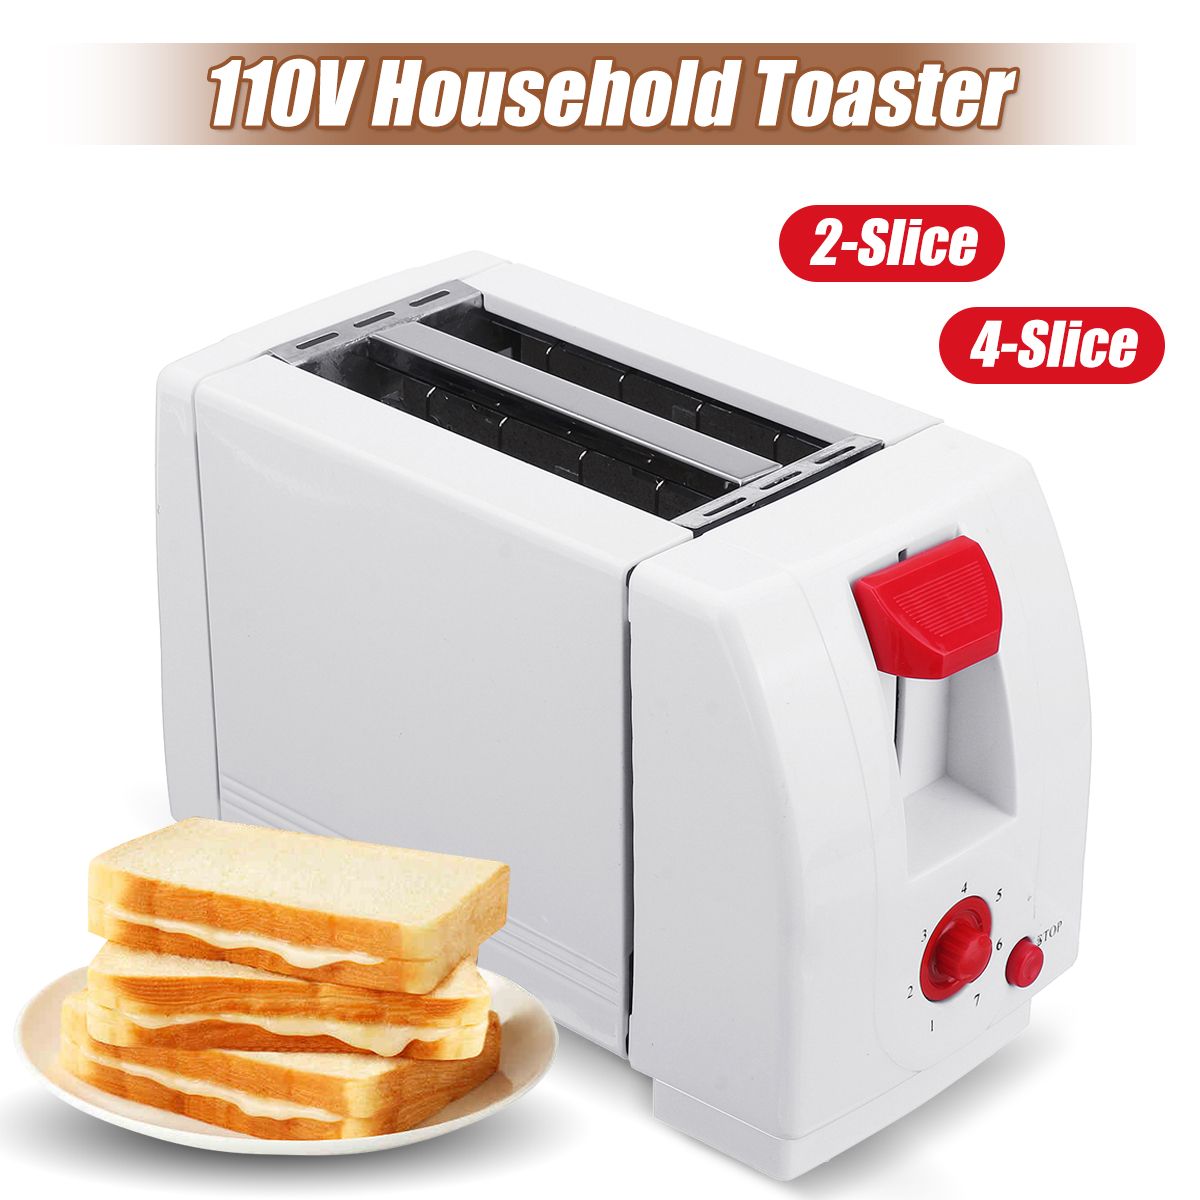 110-220V-24-Slices-Electric-Automatic-Toaster-Stainless-Bread-Maker-Extra-Wide-Slot-with-Crumb-Tray-1638795